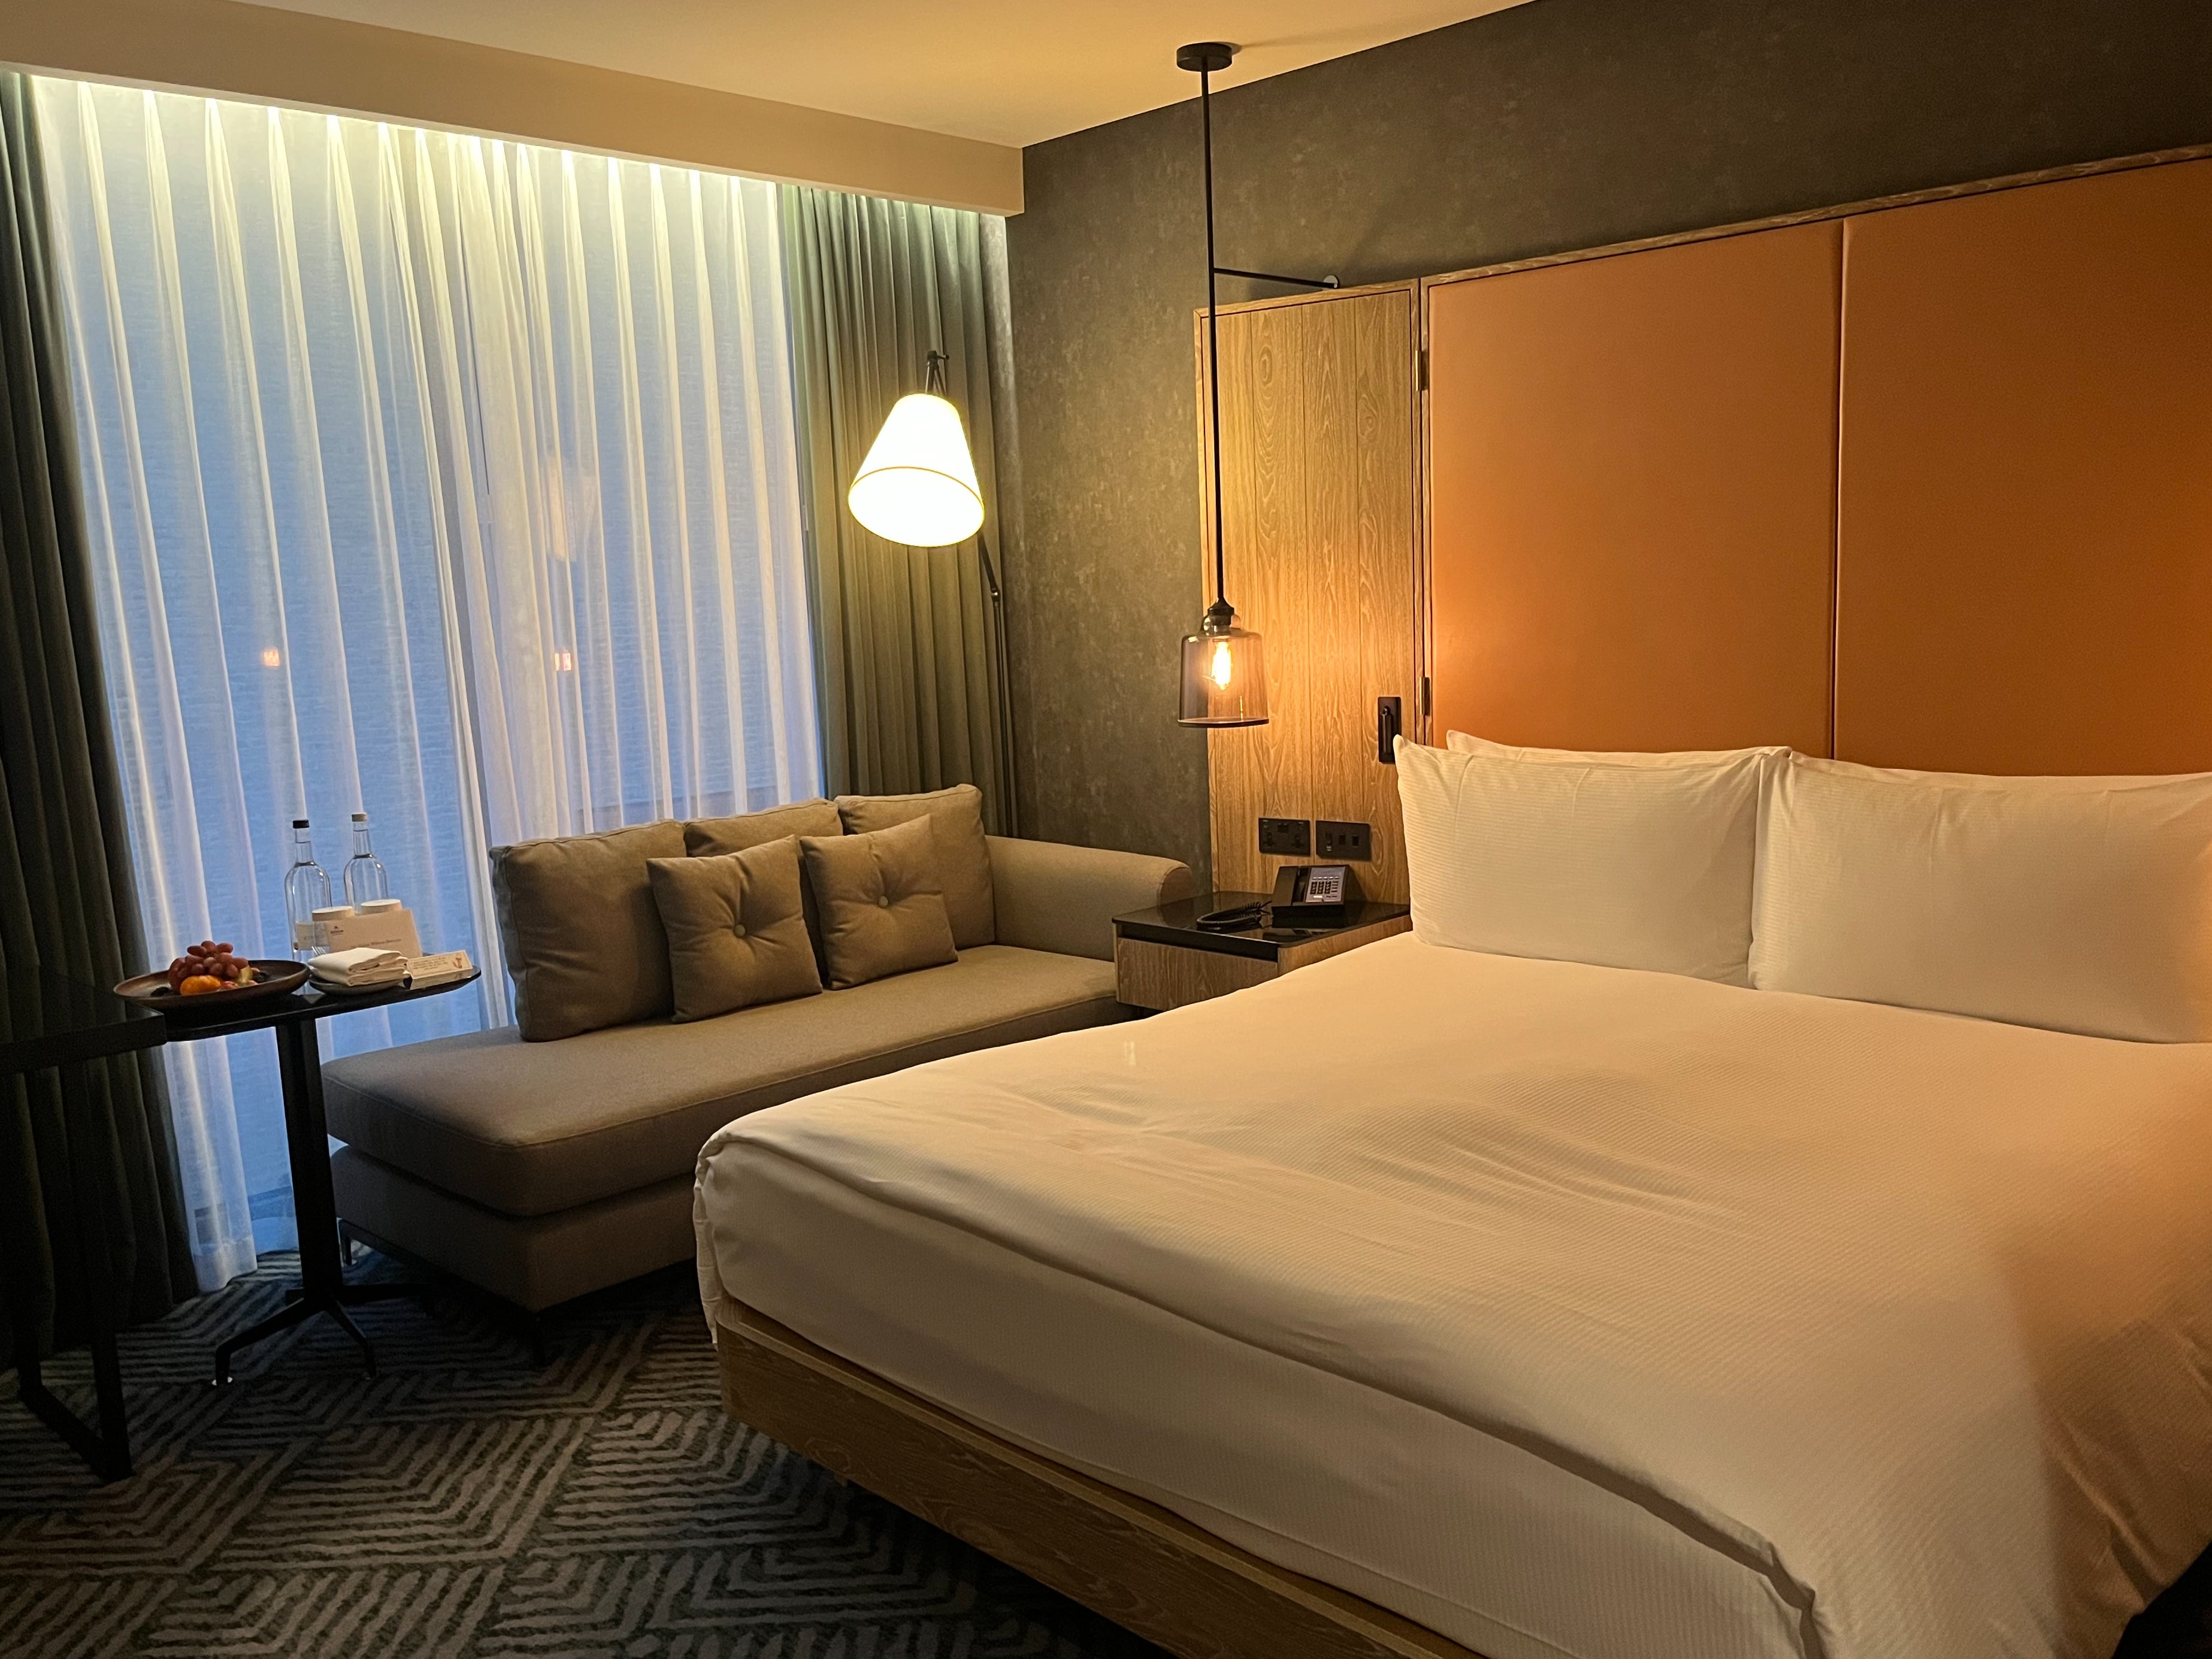 There are 292 rooms at the hotel, with interconnecting options available